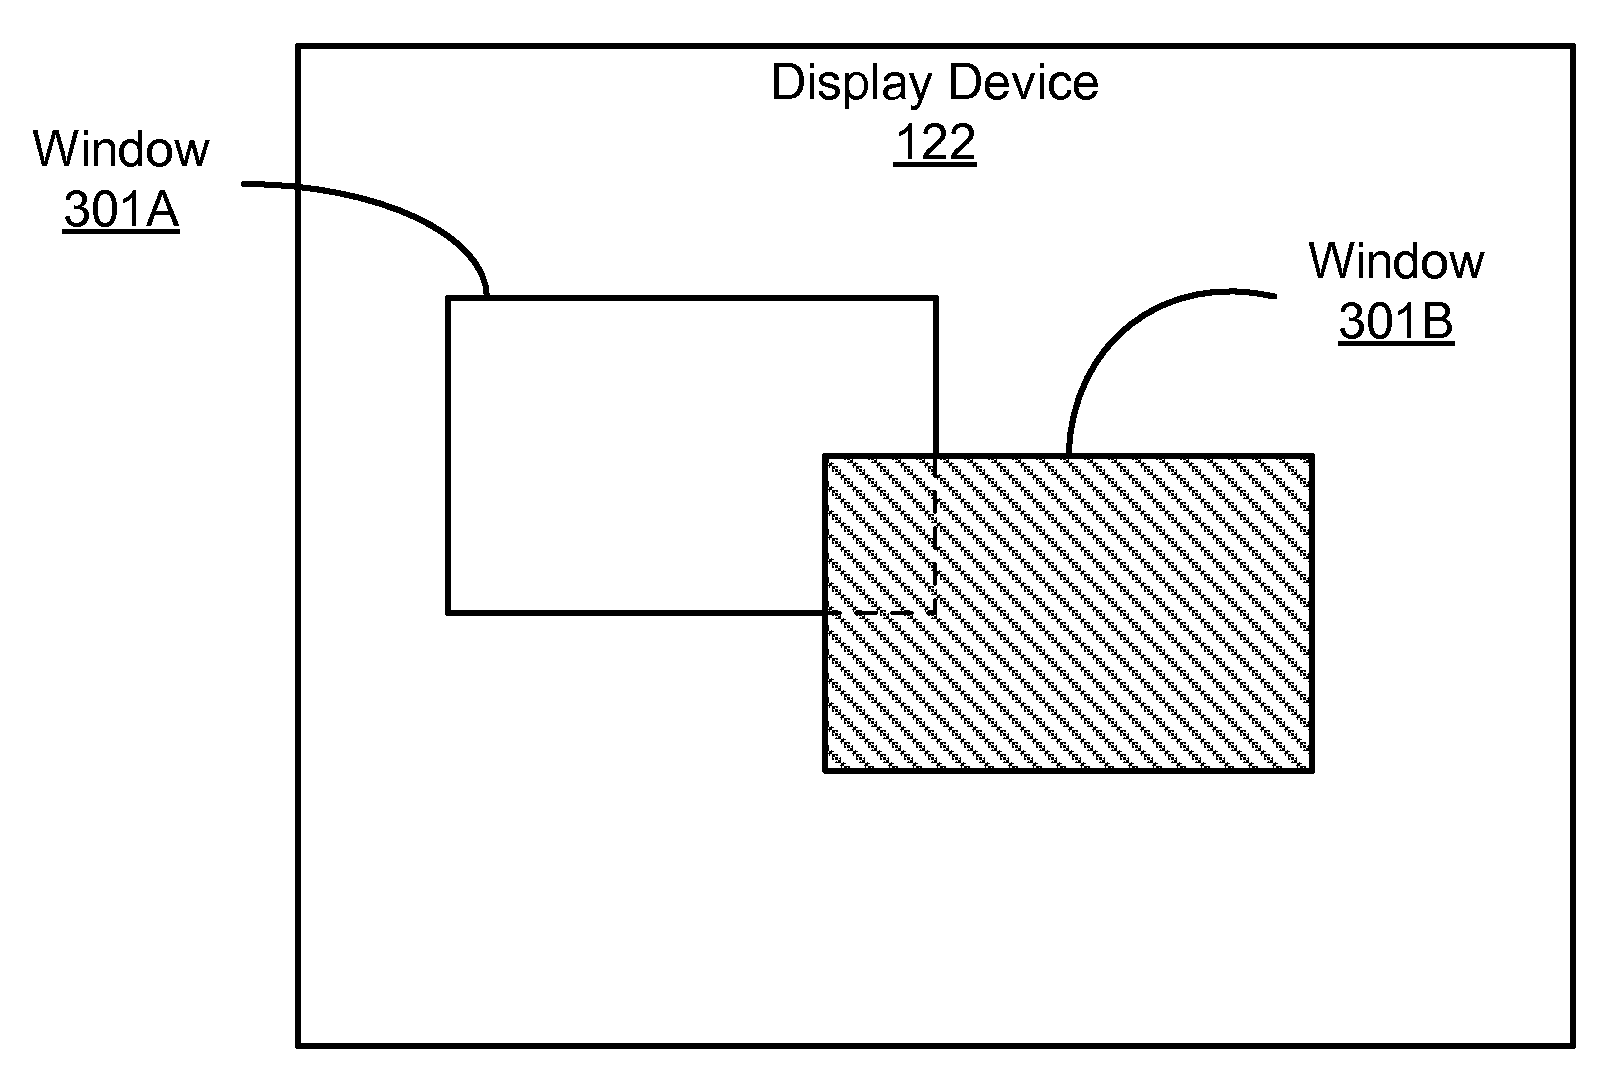 Compositing Windowing System